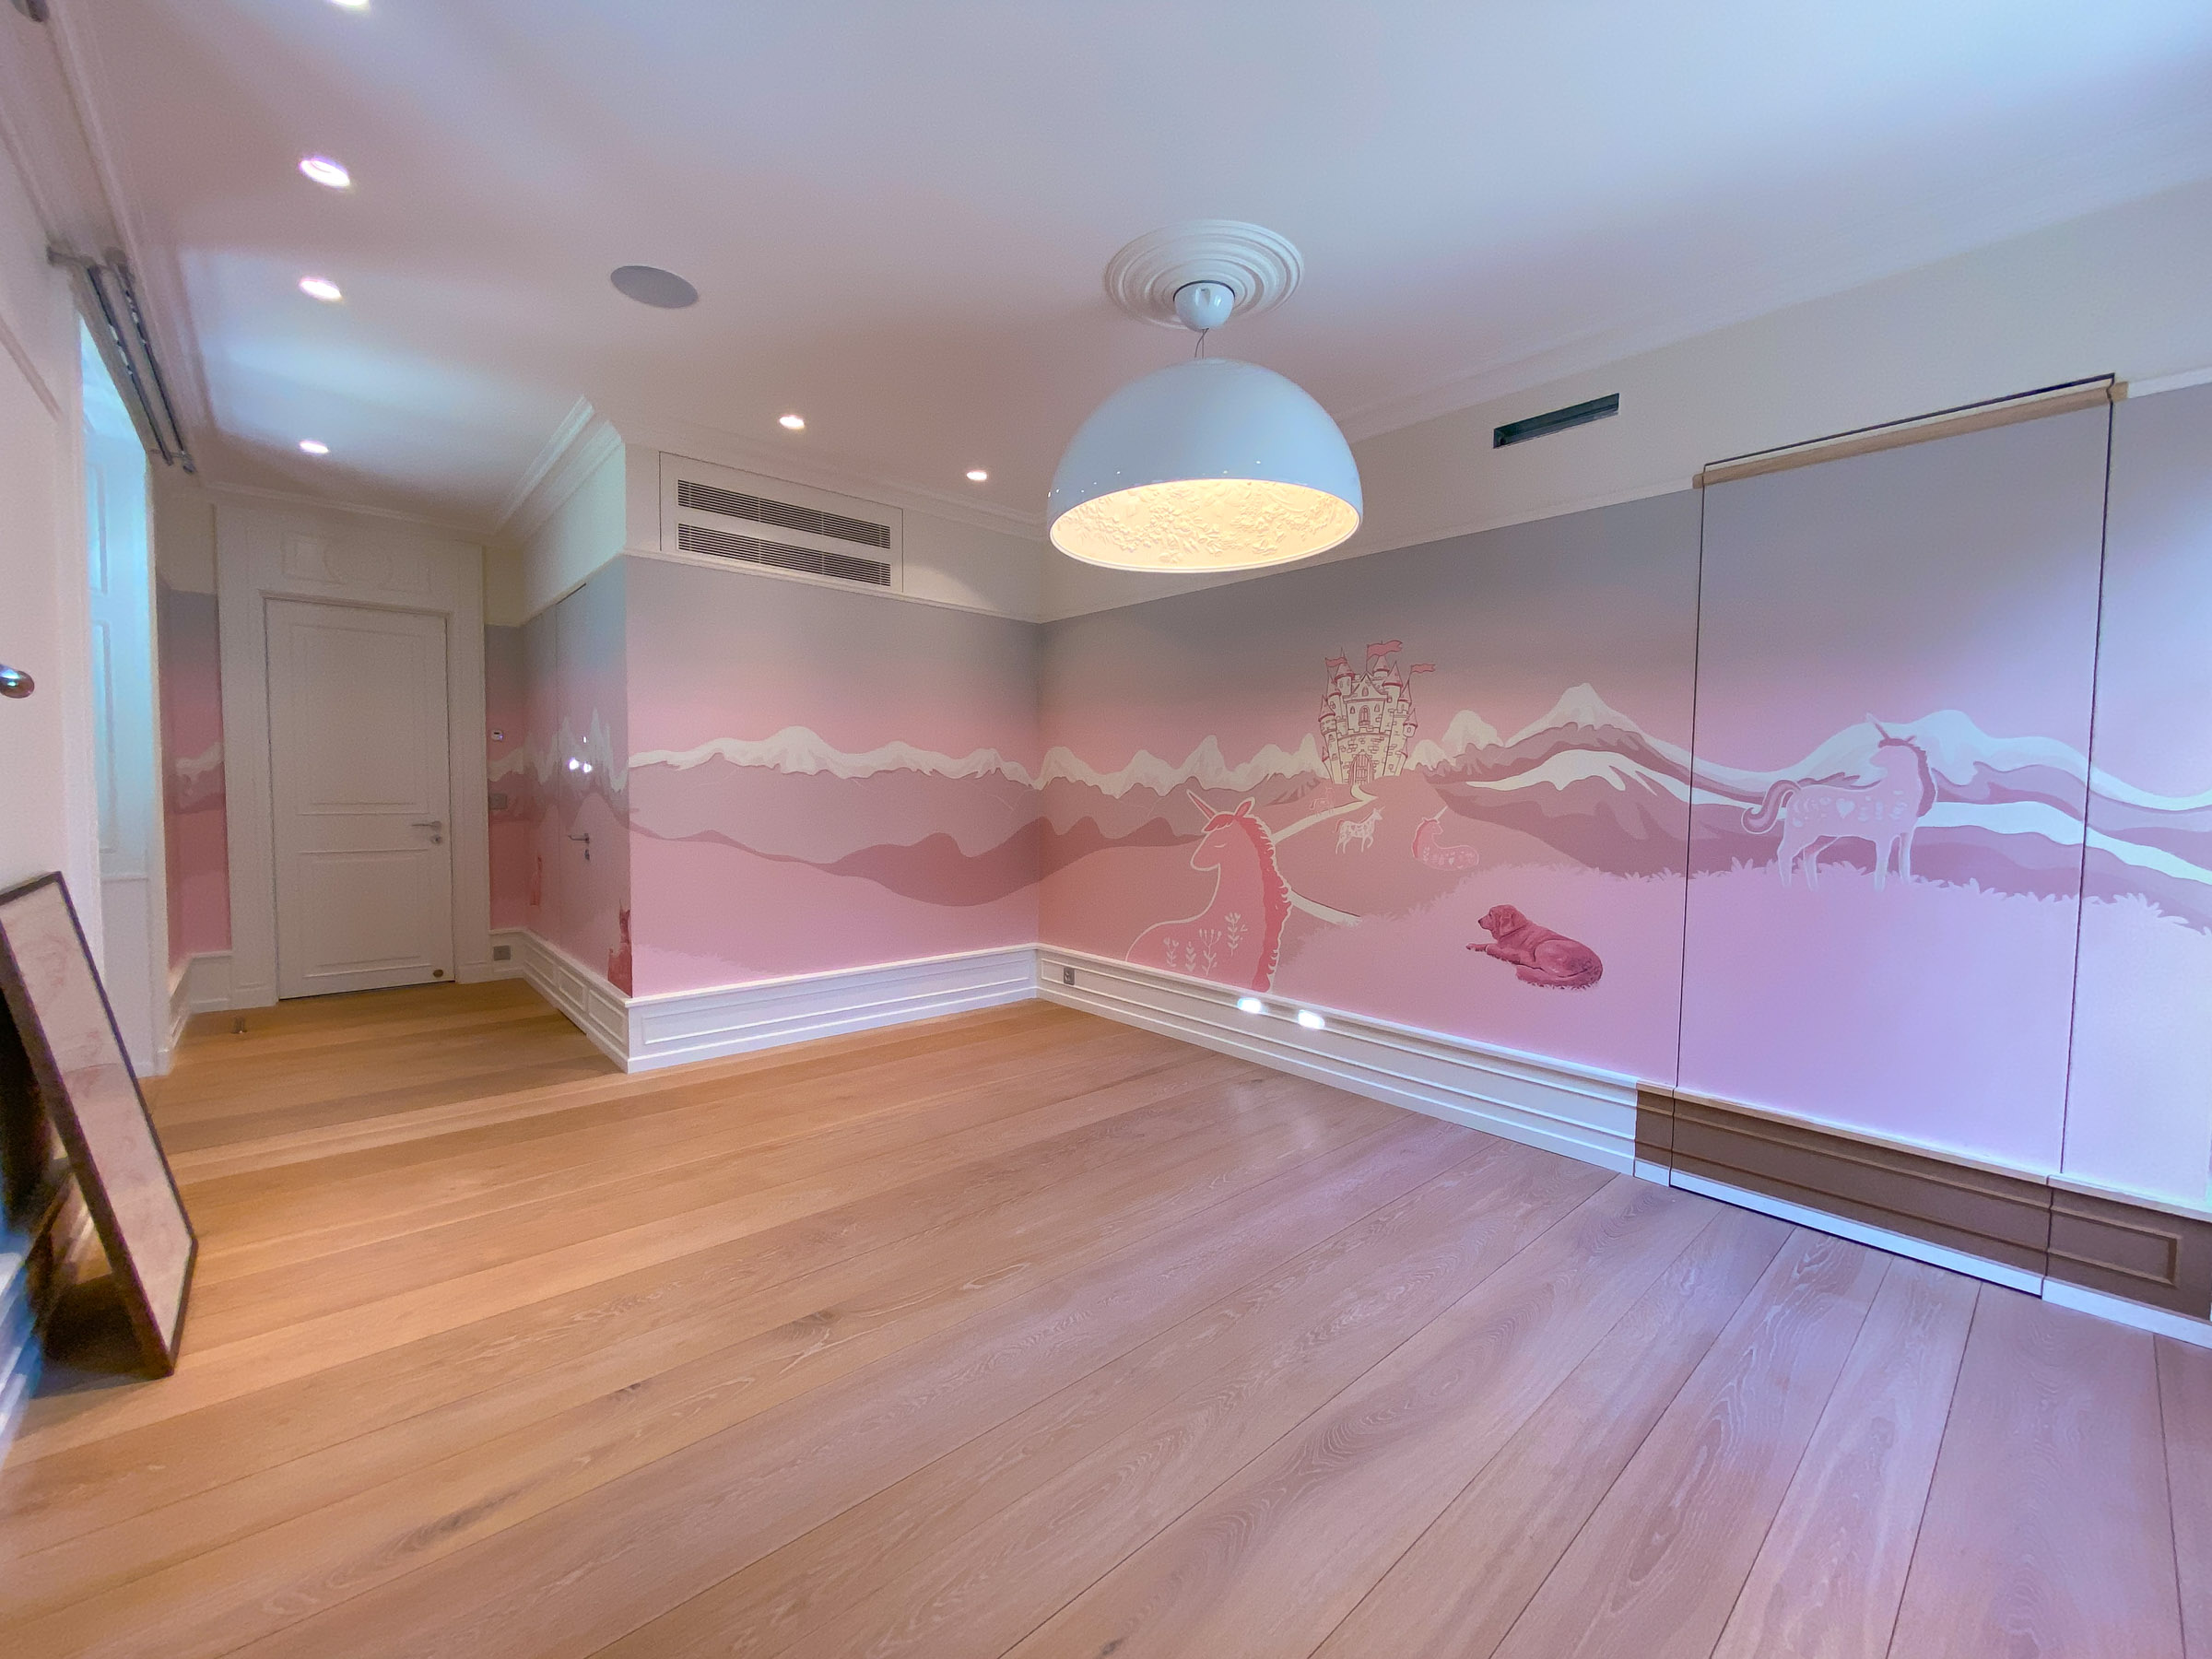 and lastly a few more shots of the Pretty in Pink Mural, showing the aspect and overview of the room, before the rest of the furniture moved in!<